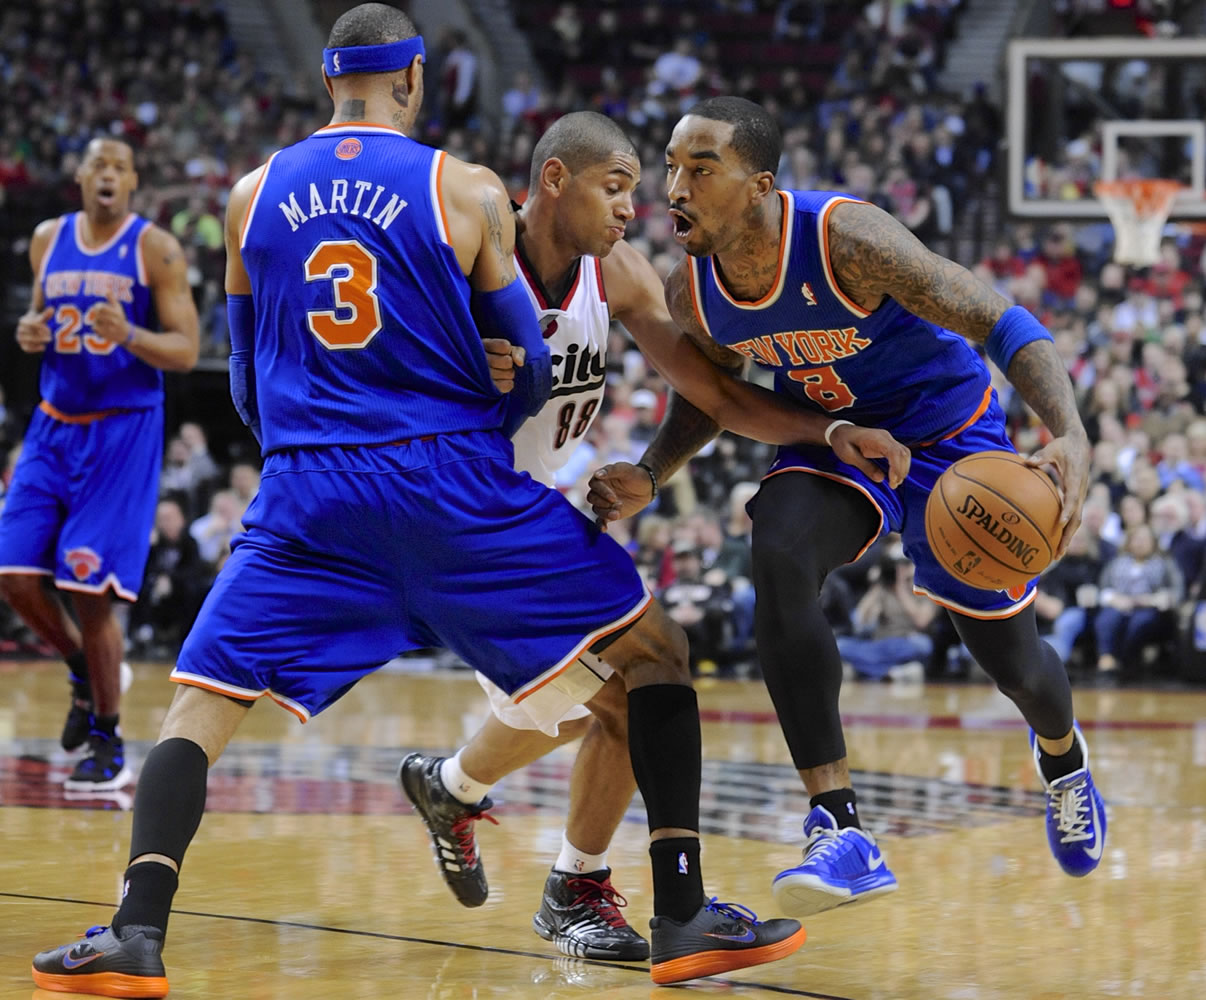 New York Knicks' J.R. Smith (8), with a screen by teammate Kenyon Martin (3), drives against Portland Trail Blazers' Nicolas Batum (88) during the first half of an NBA  basketball game in Portland, Ore., Thursday, March 14, 2013.